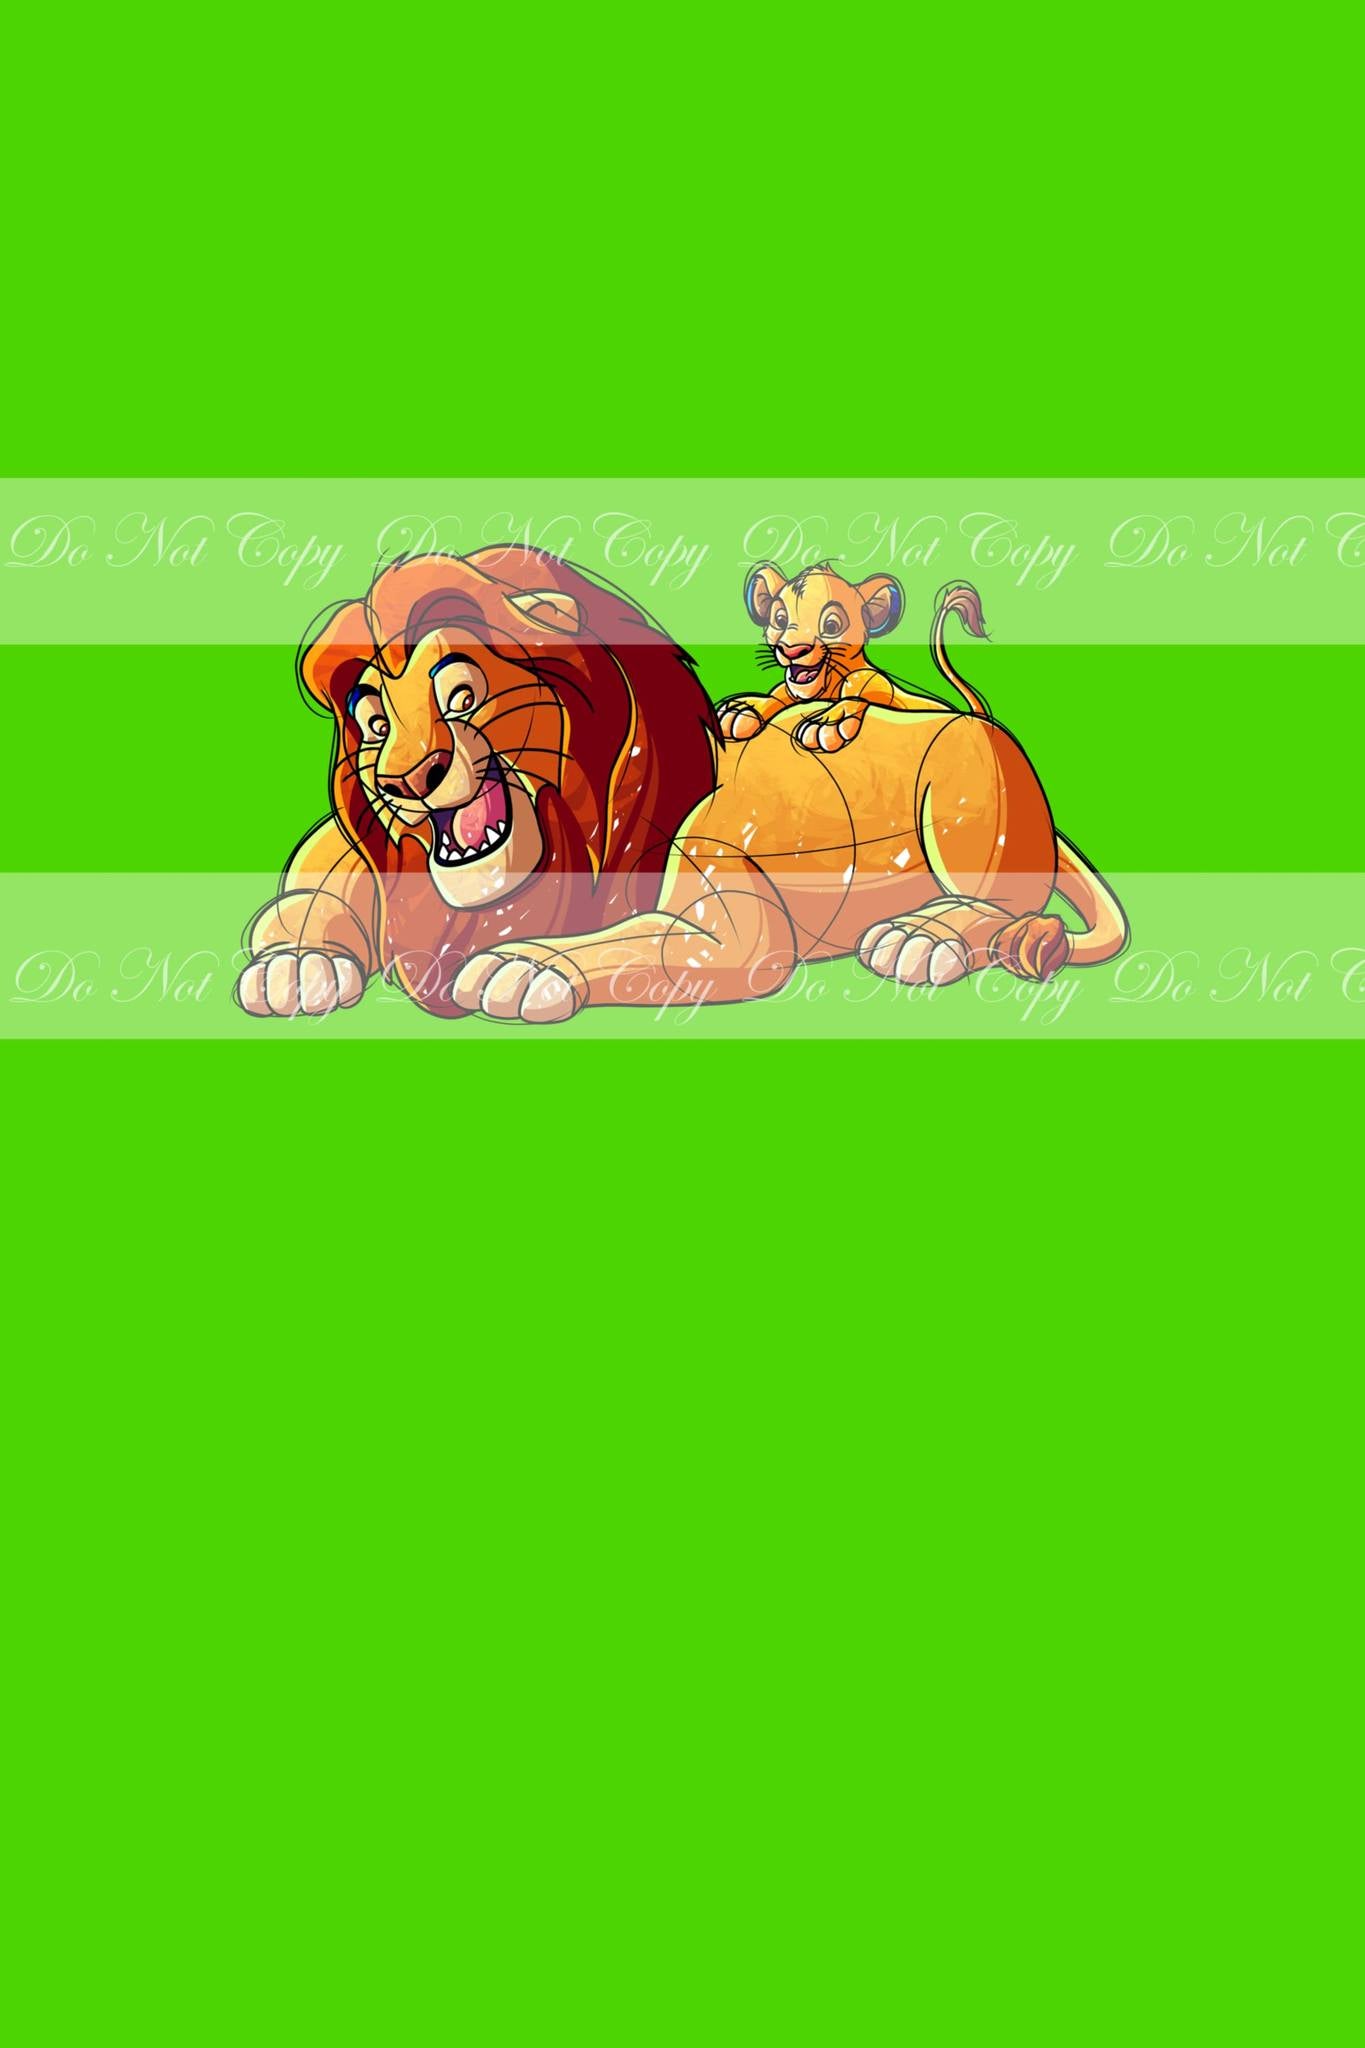 Preorder R51 -King Of The Jungle (Child, Big kids, Adults) The King and Baby